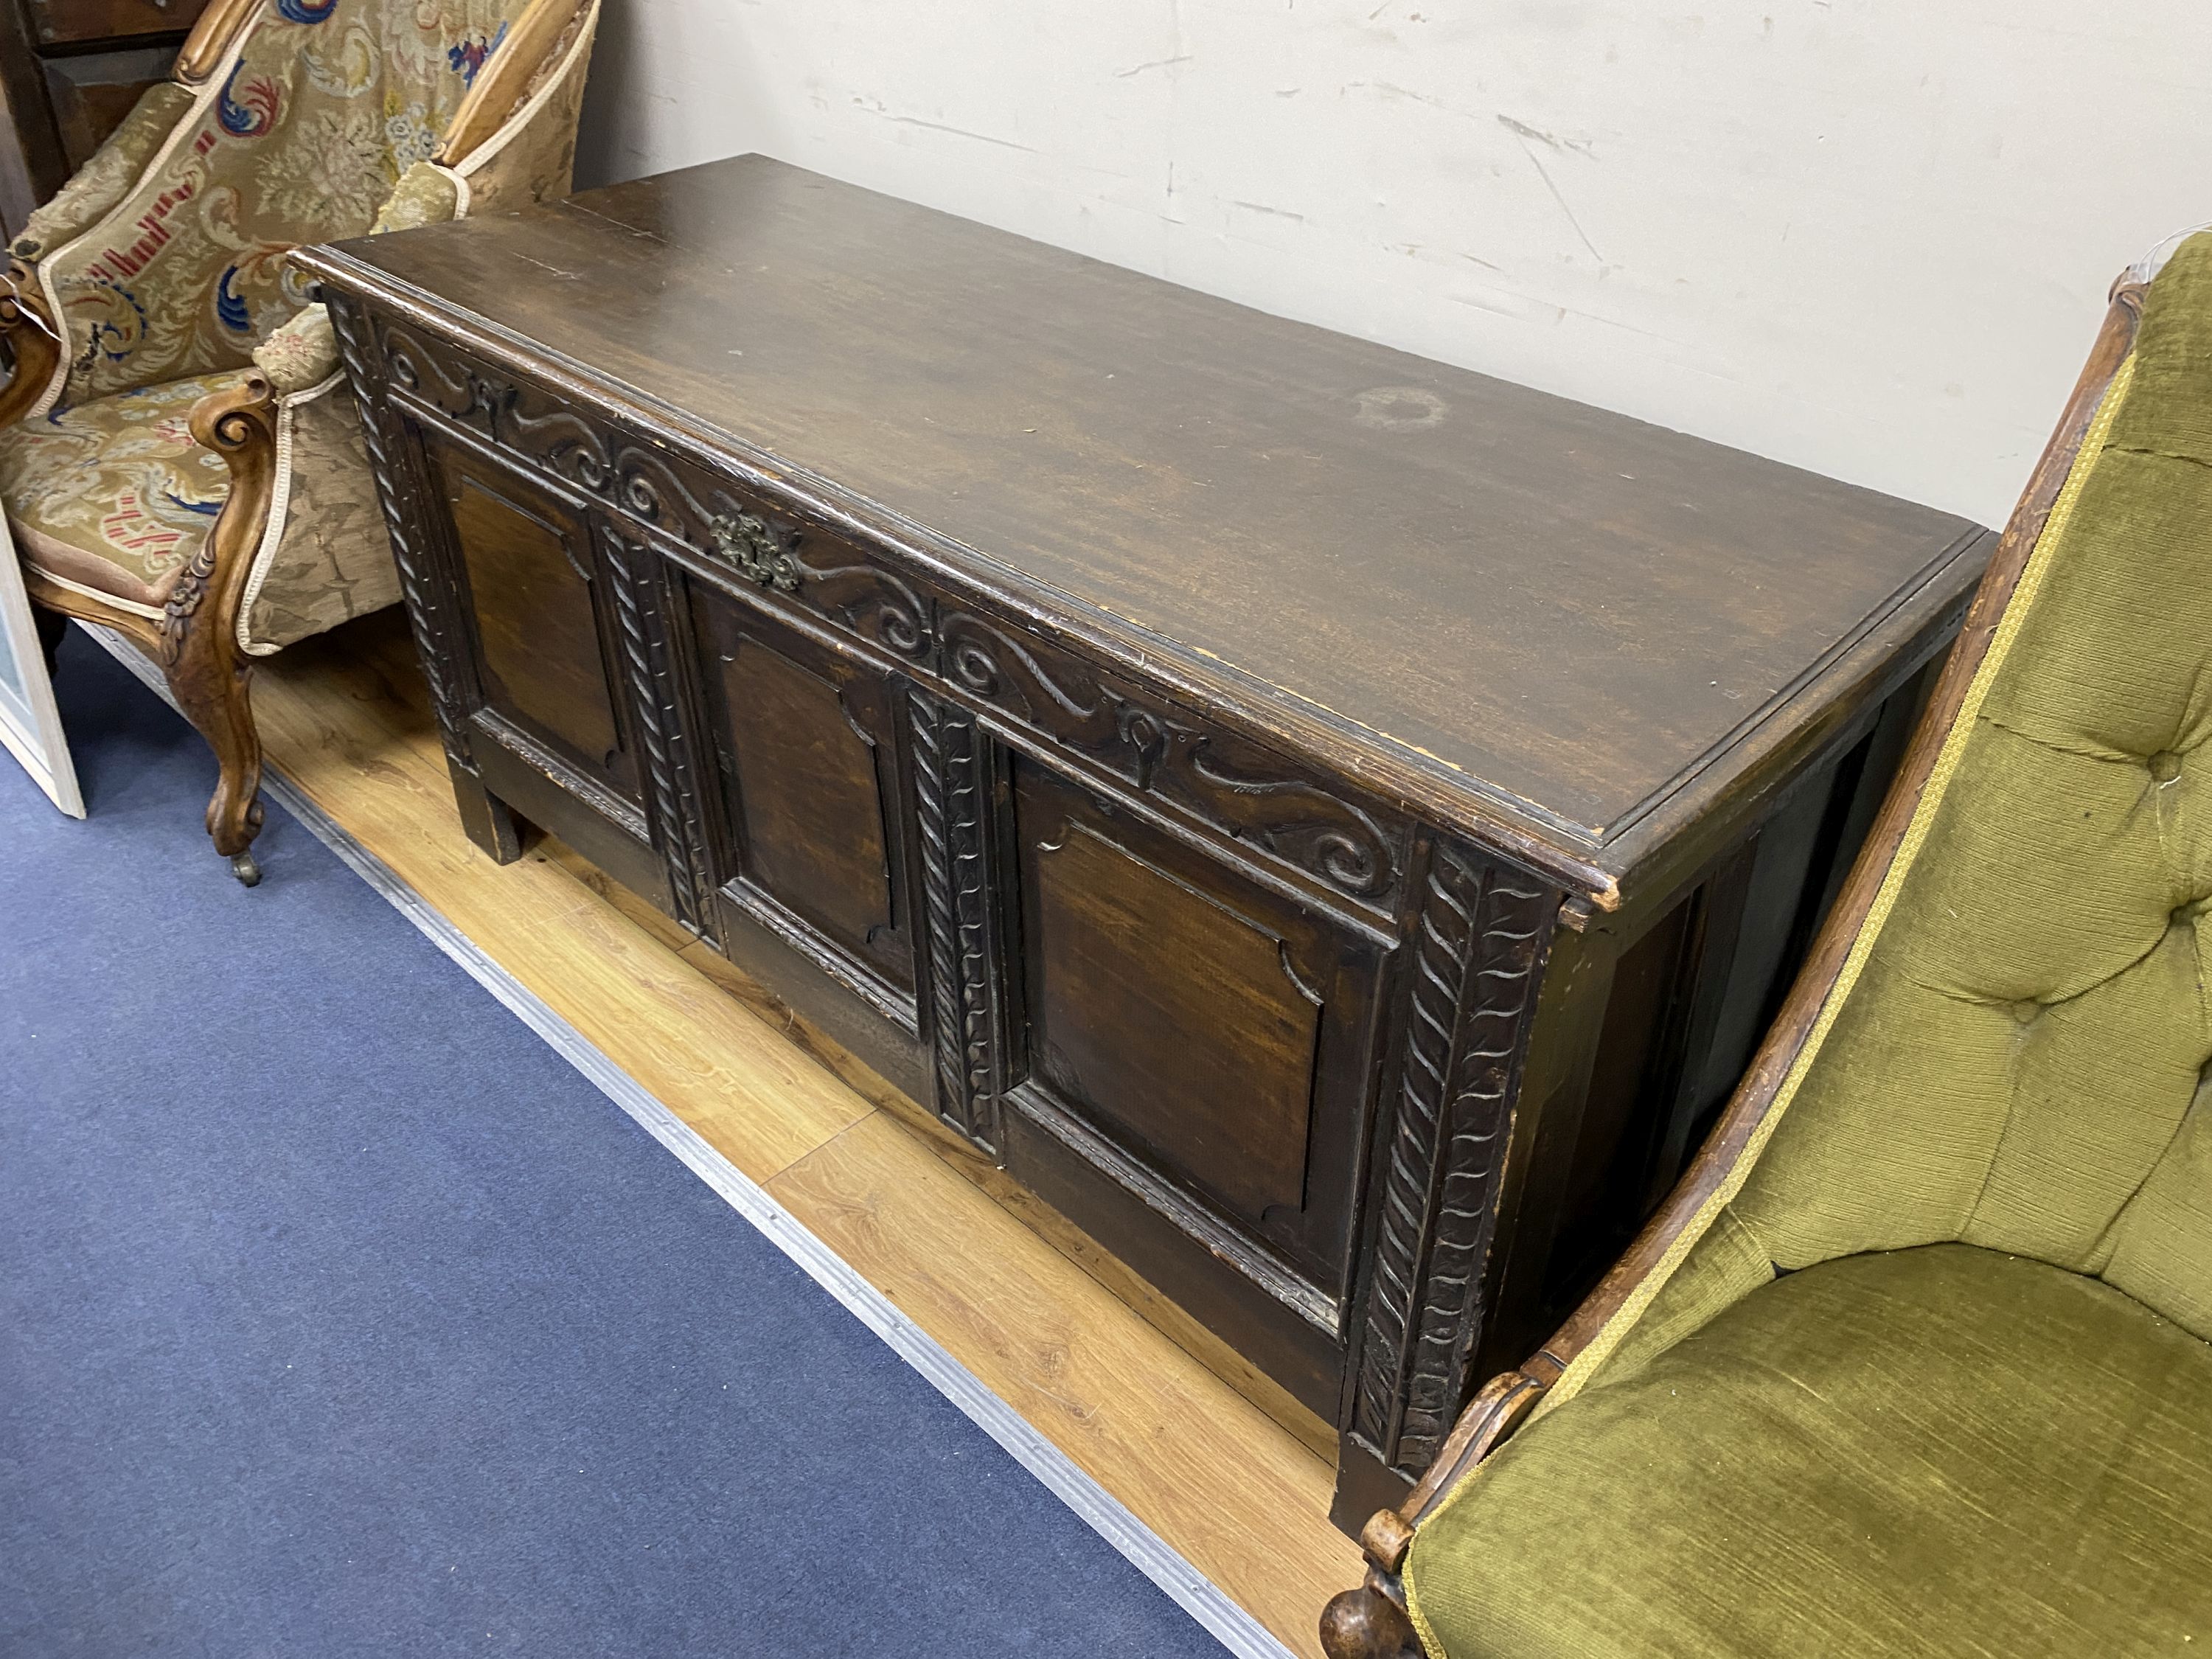 A 18th century style Cypriot carved wood panelled coffer, length 142cm, depth 51cm, height 67cm